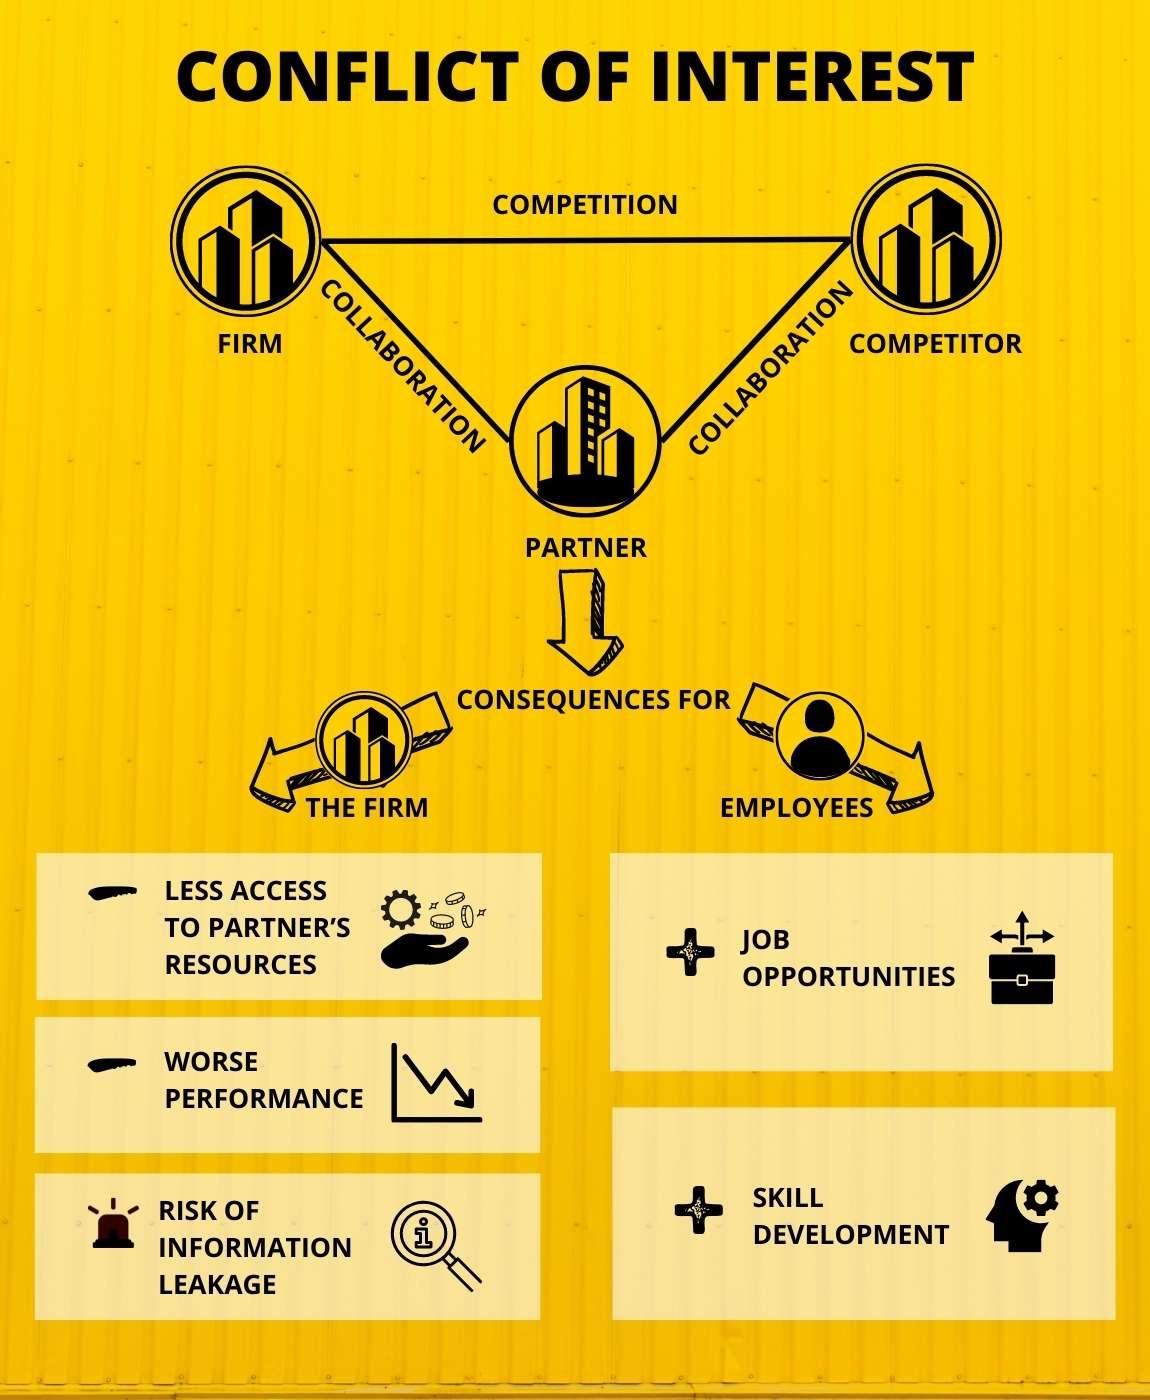 An infografic shows the case of competing companies collaborating with the same corporate partner: it hurts firm performance, but helps employees develop social capital and advance their careers